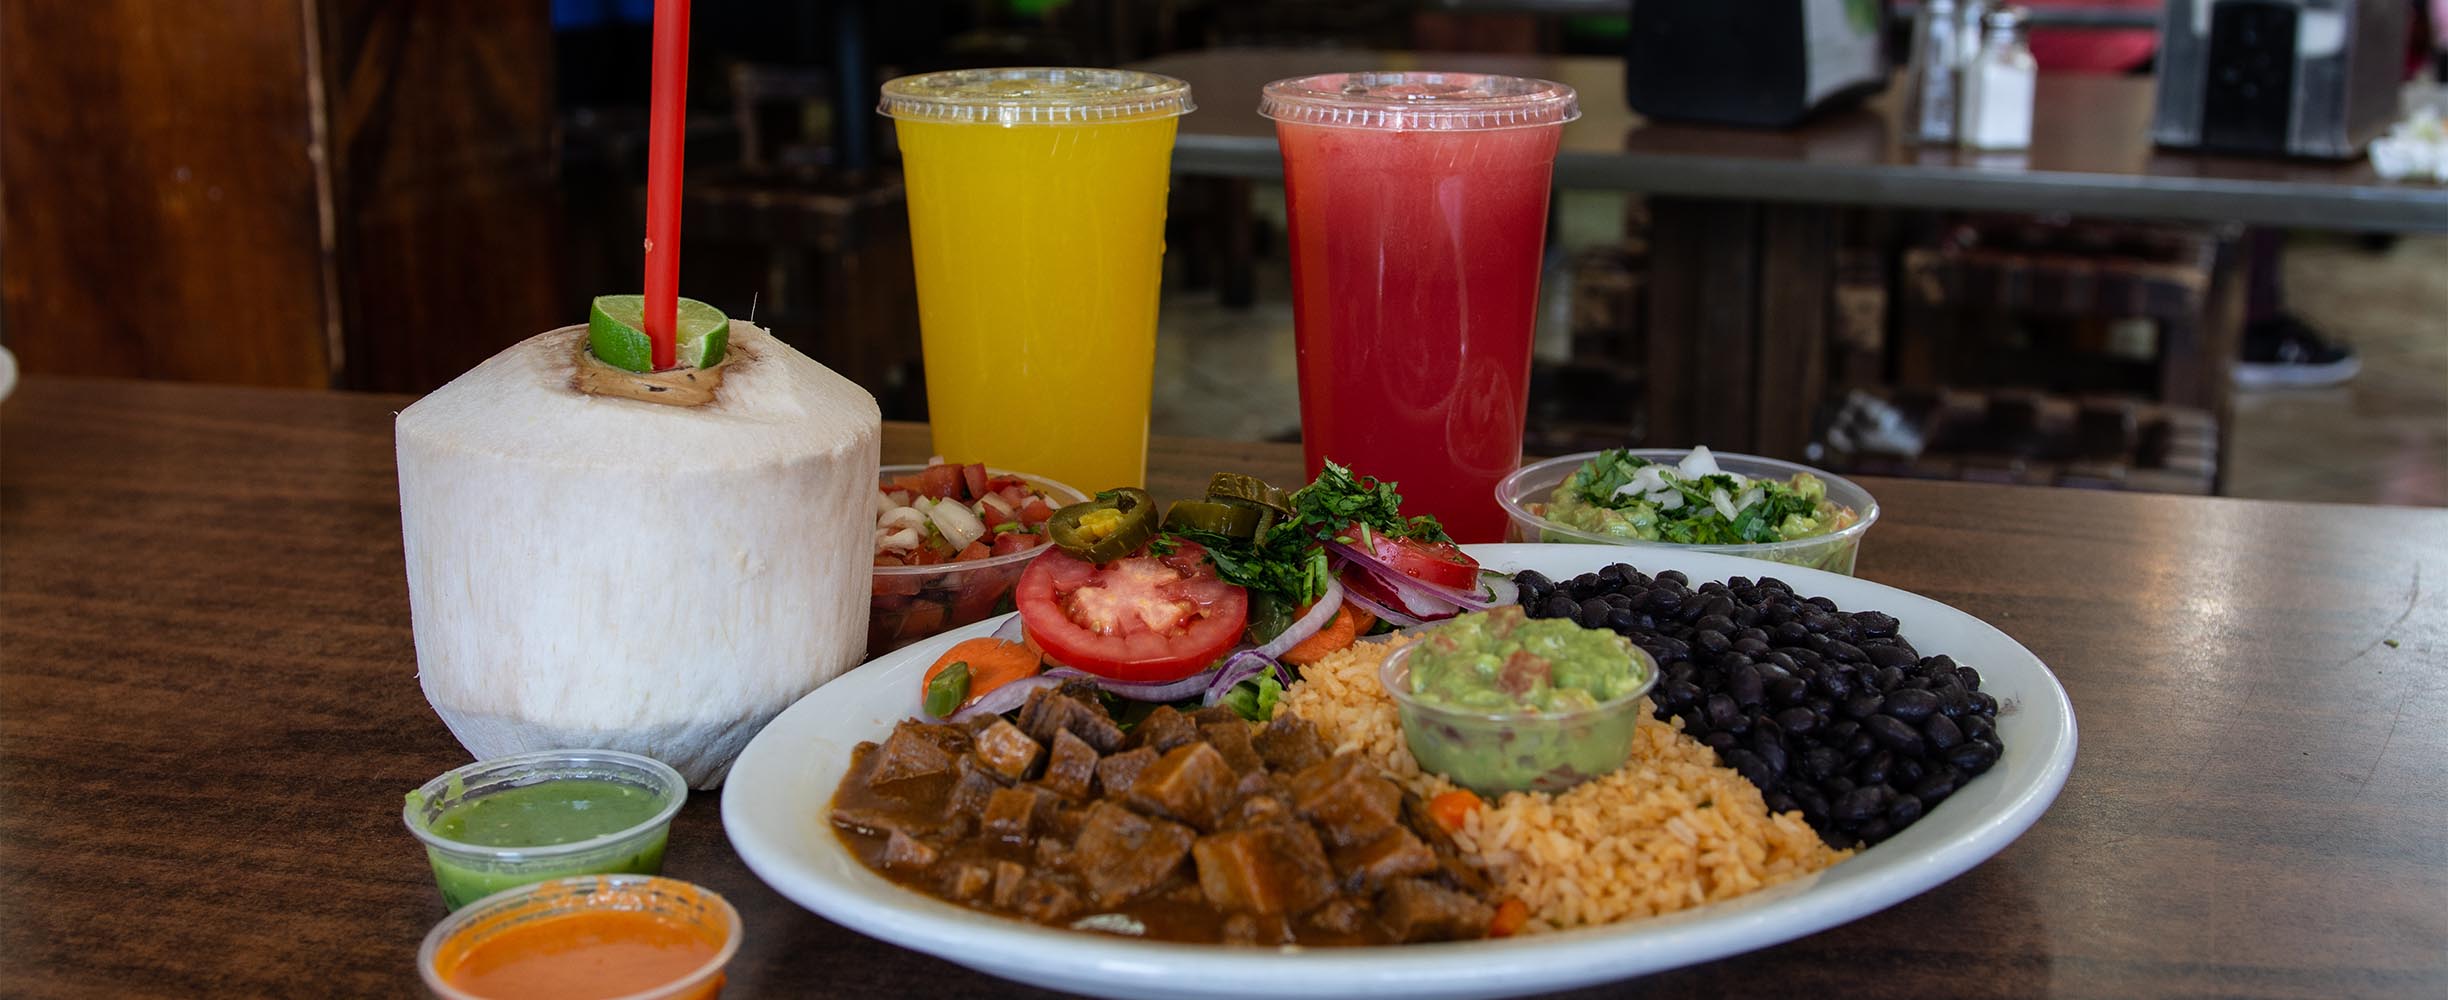 Typical Mexican juices made from scratch are offewred with all of our dishes.